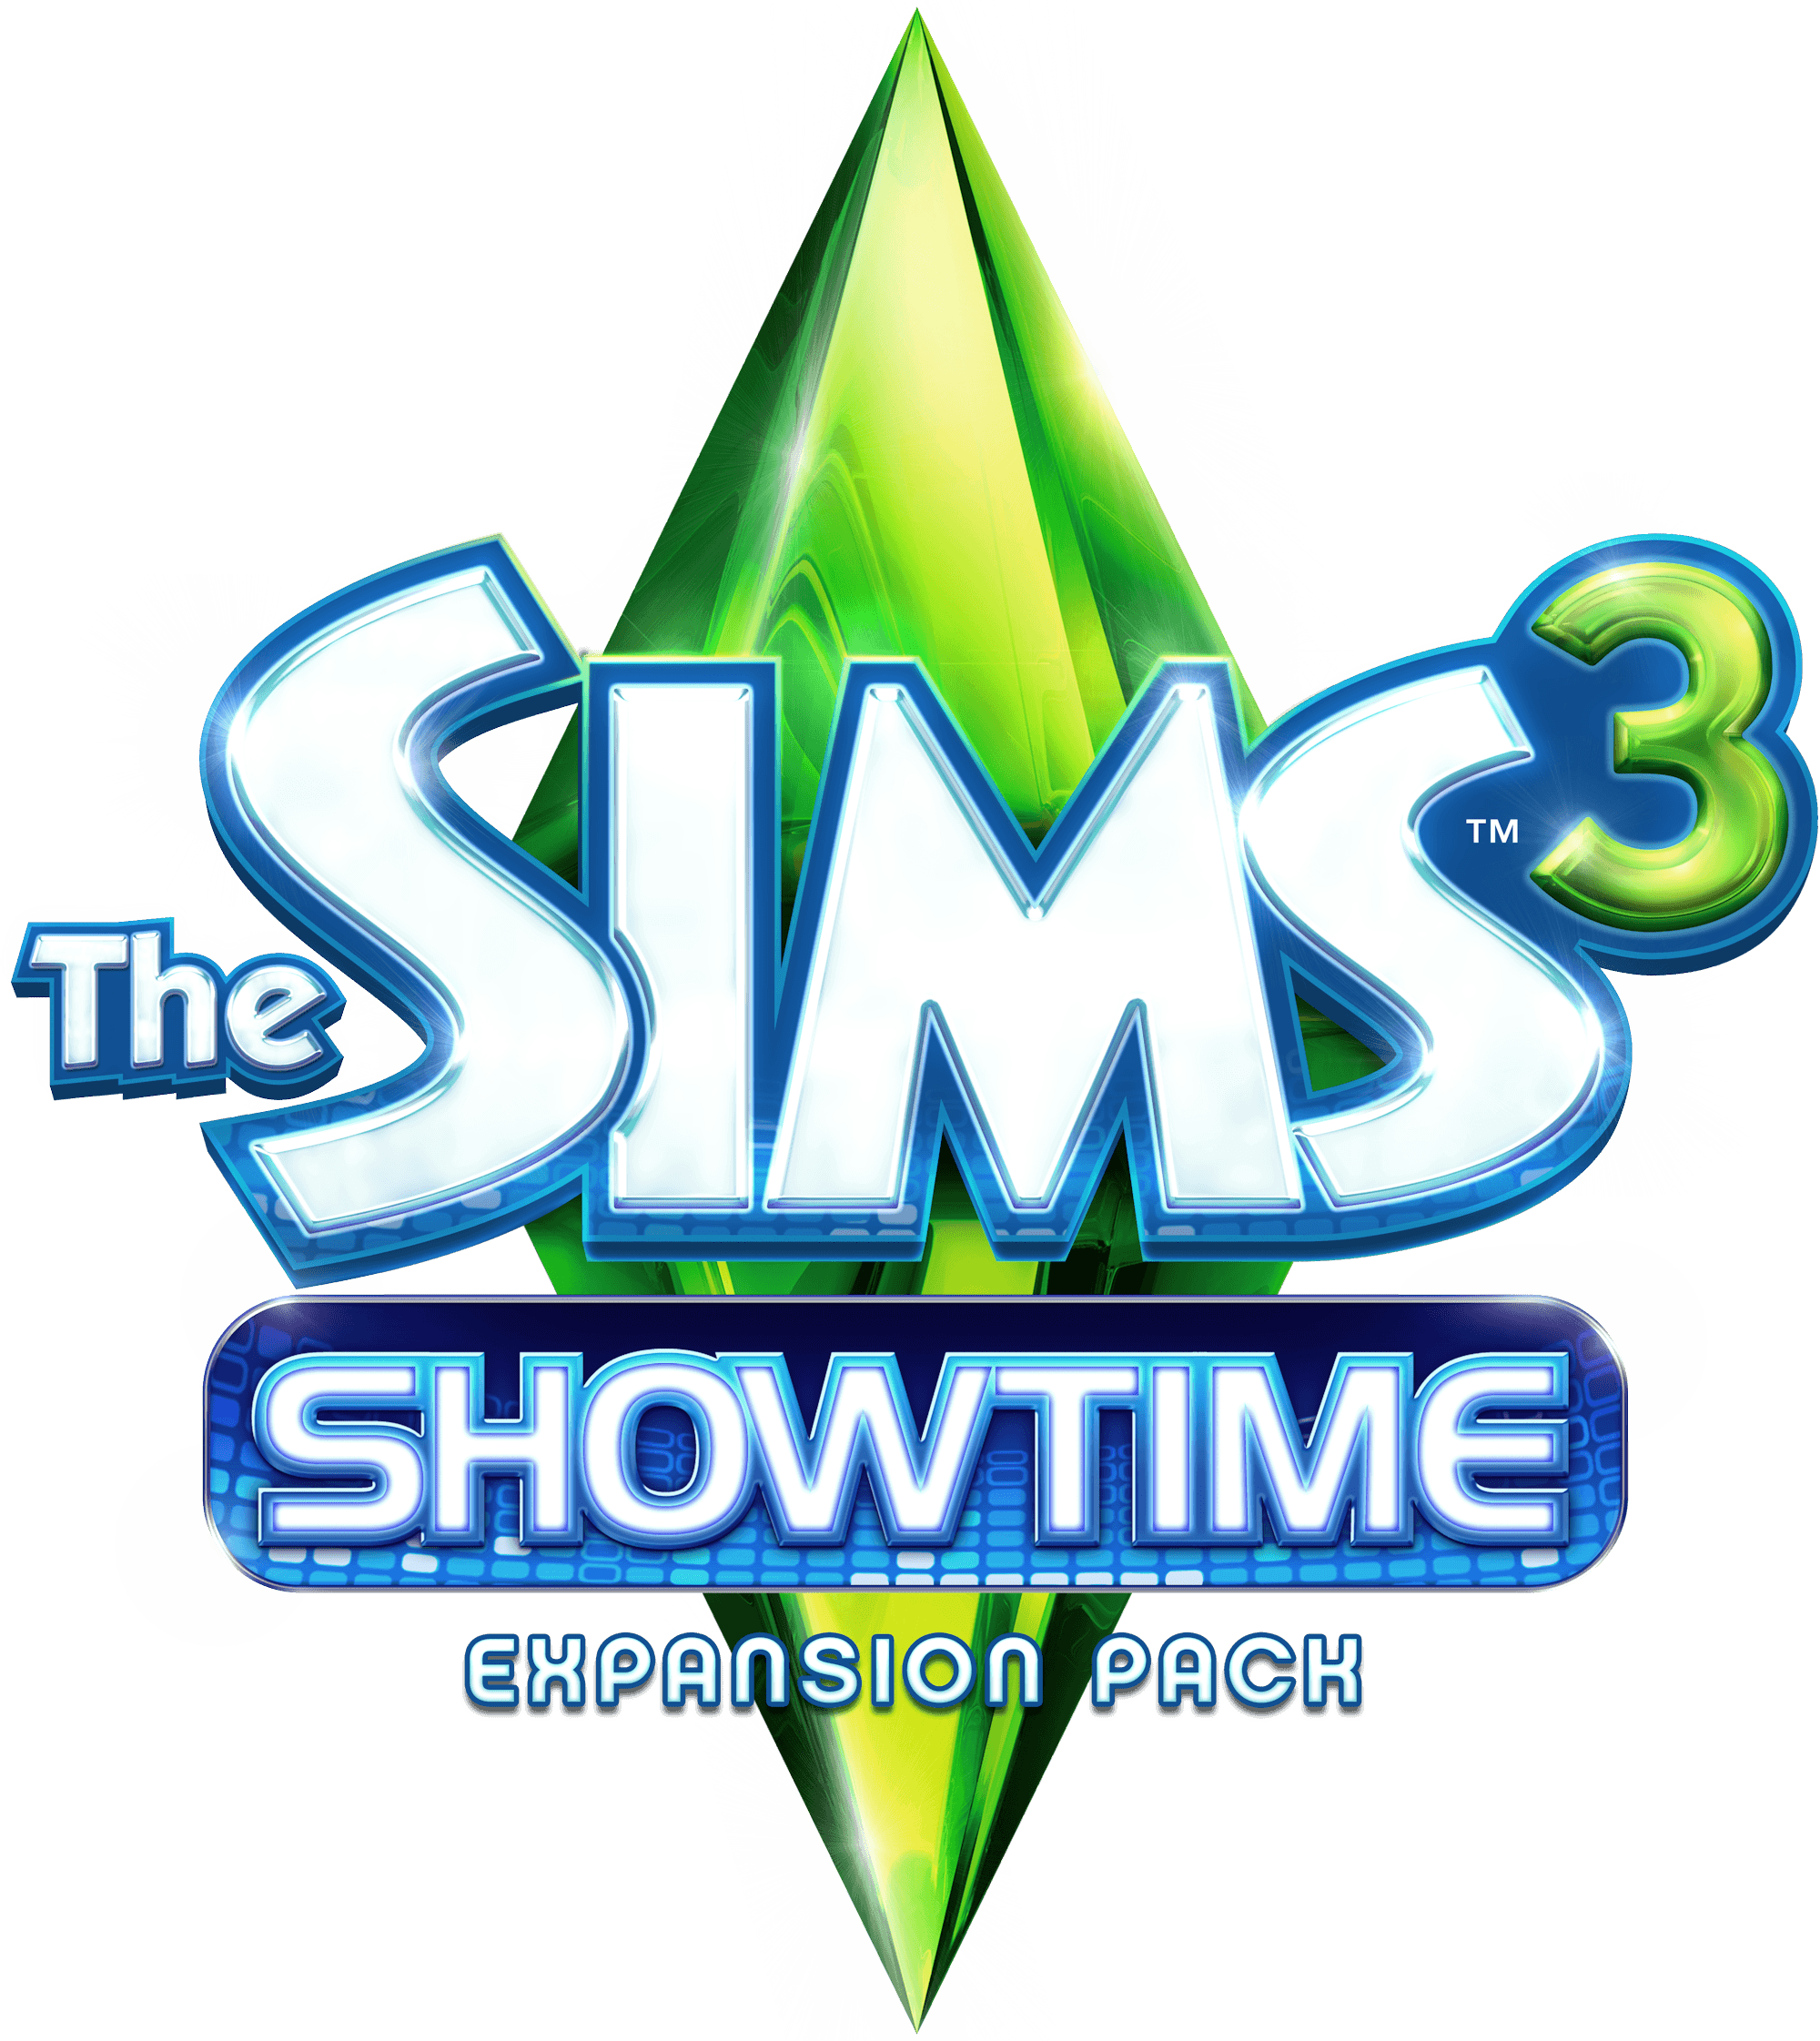 Sims 3 Logo - Image - The Sims 3 - Showtime.png | Logopedia | FANDOM powered by Wikia